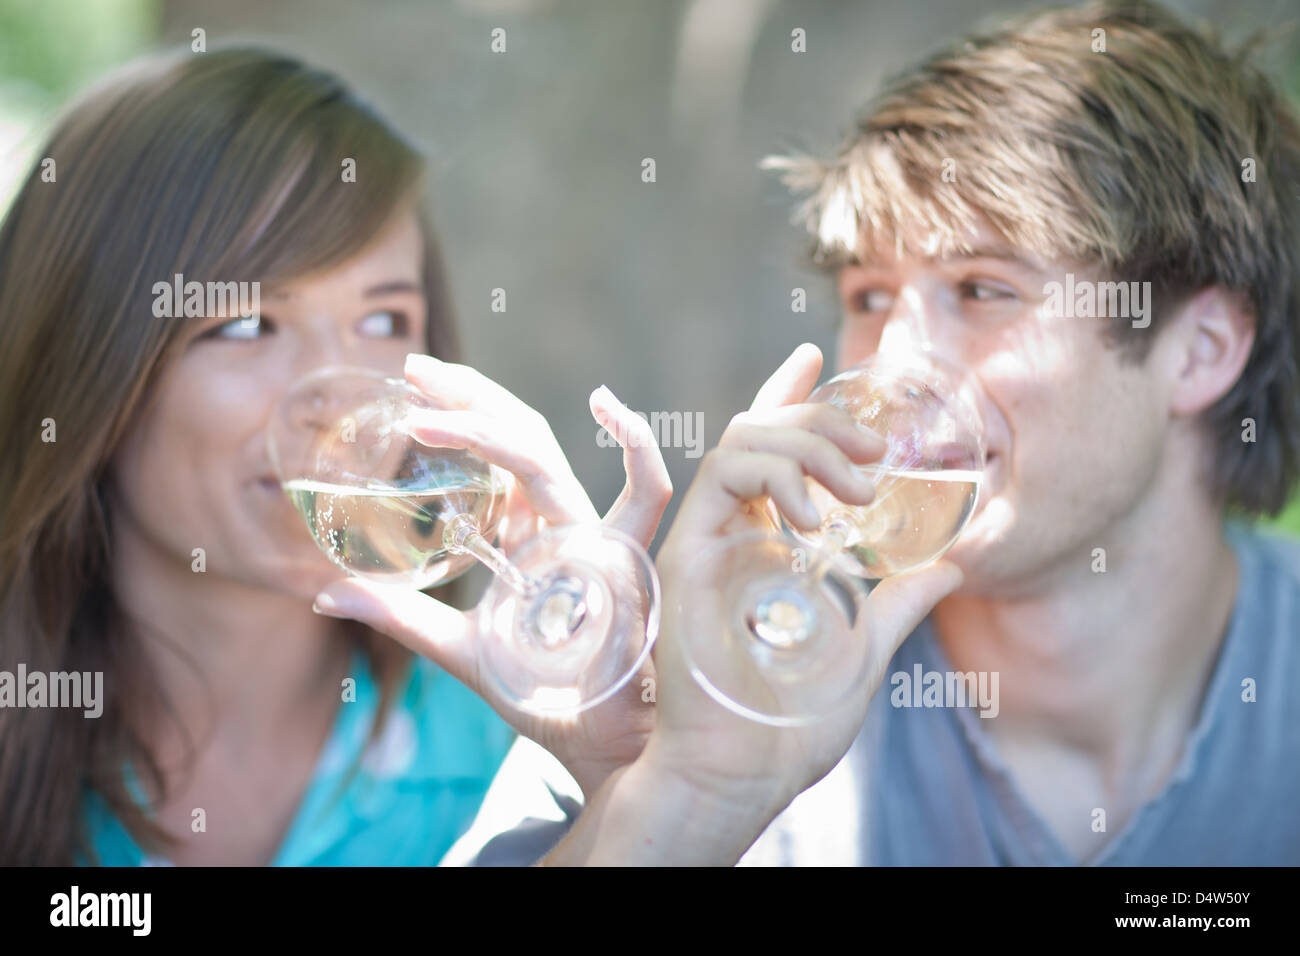 Couple drinking wine together outdoors Stock Photo